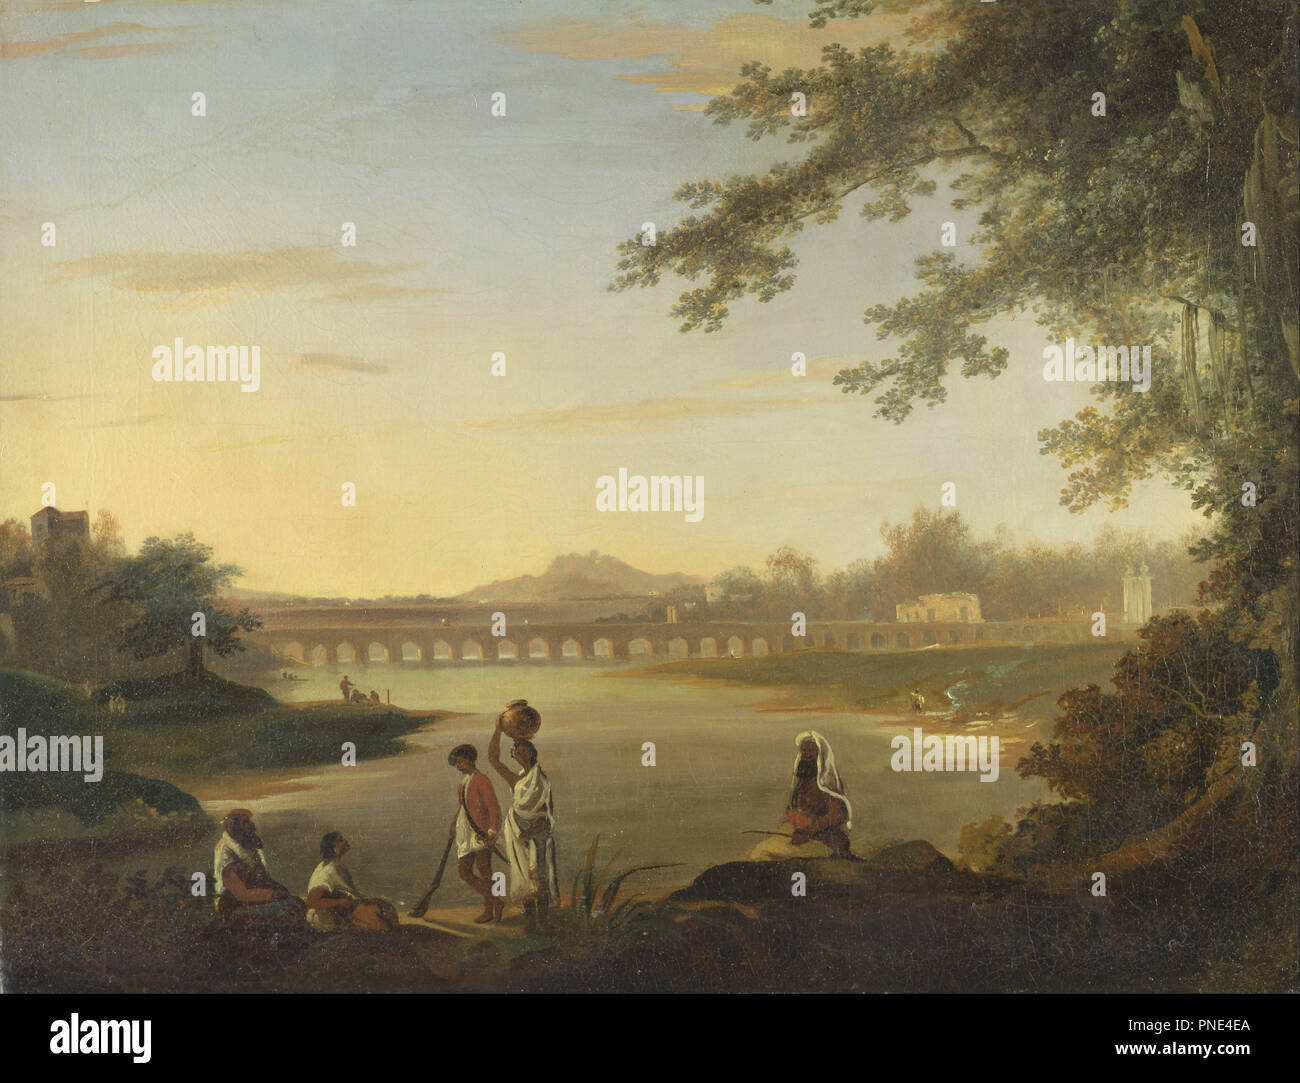 The Marmalong Bridge, with a Sepoy and Natives in the Foreground. Date/Period: Ca. 1783. Painting. Oil on canvas. Height: 883 mm (34.76 in); Width: 1,086 mm (42.75 in). Author: William Hodges. Stock Photo